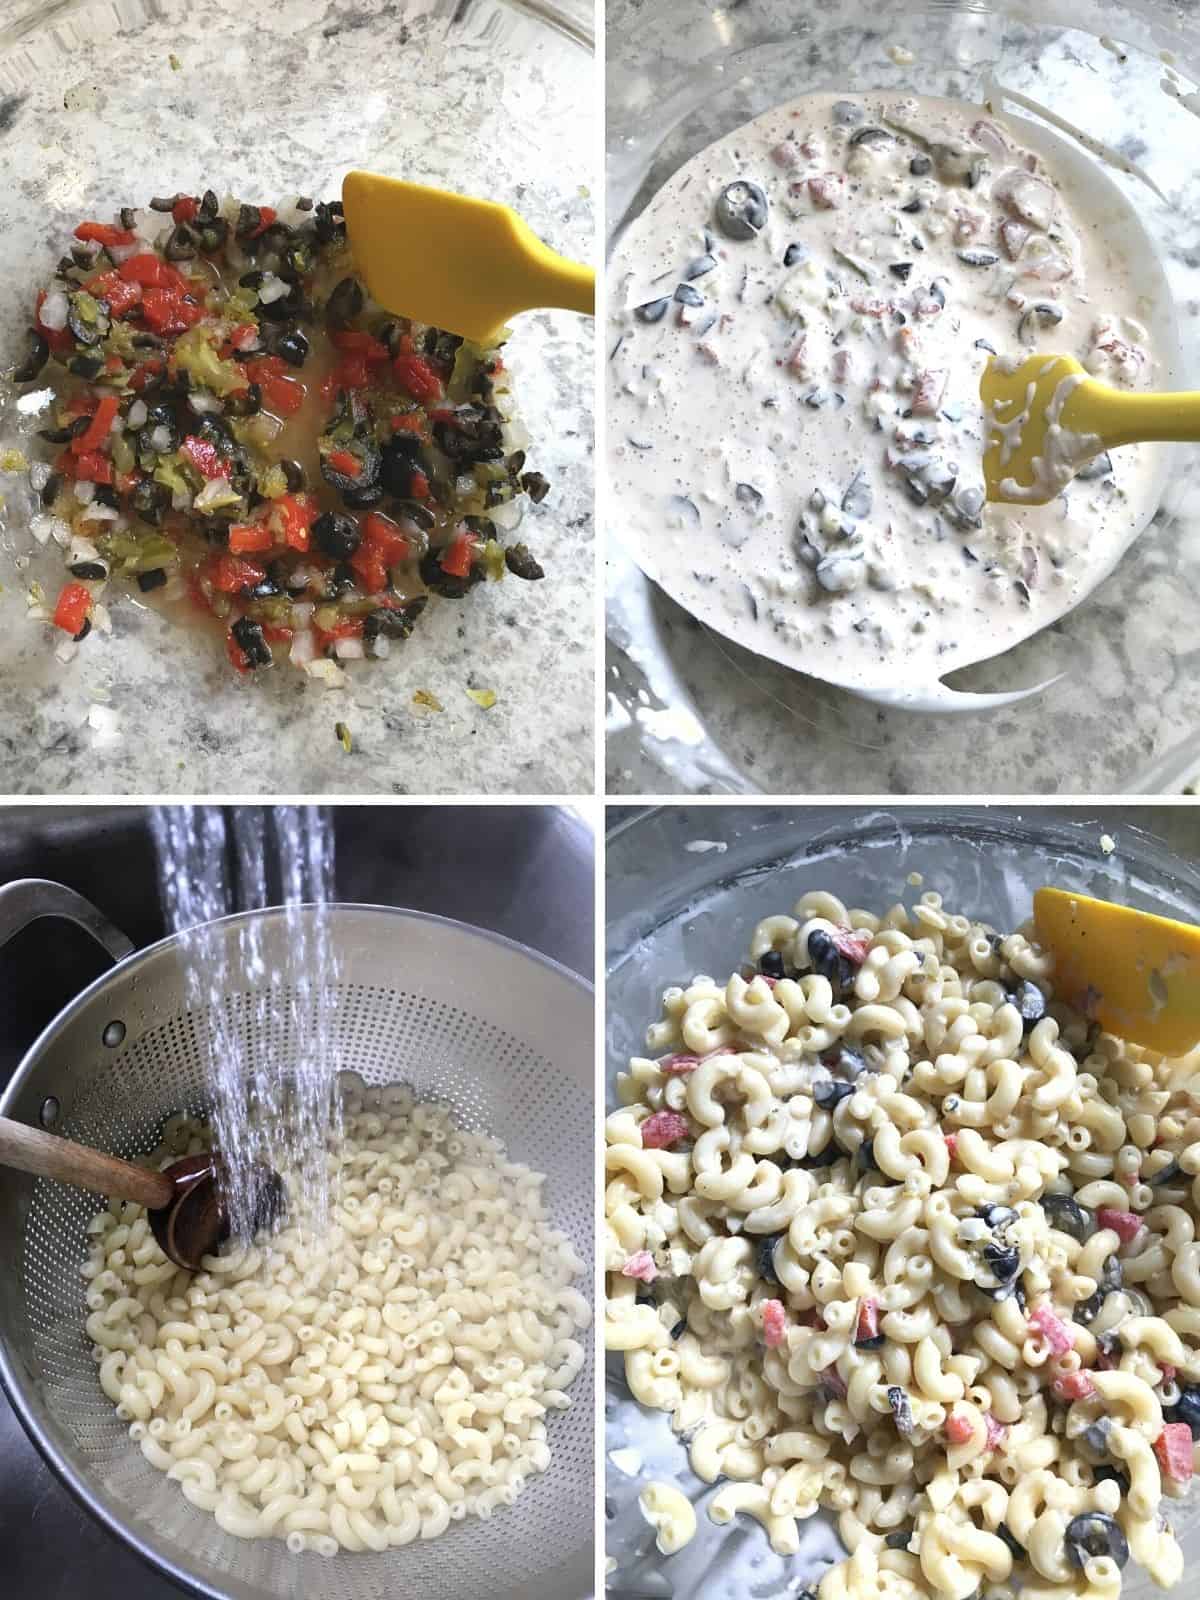 Four Images. Top: Mixing the dressing. Bottom left: Rinsing Pasta. Bottom Right: Mixing Macaroni Salad.